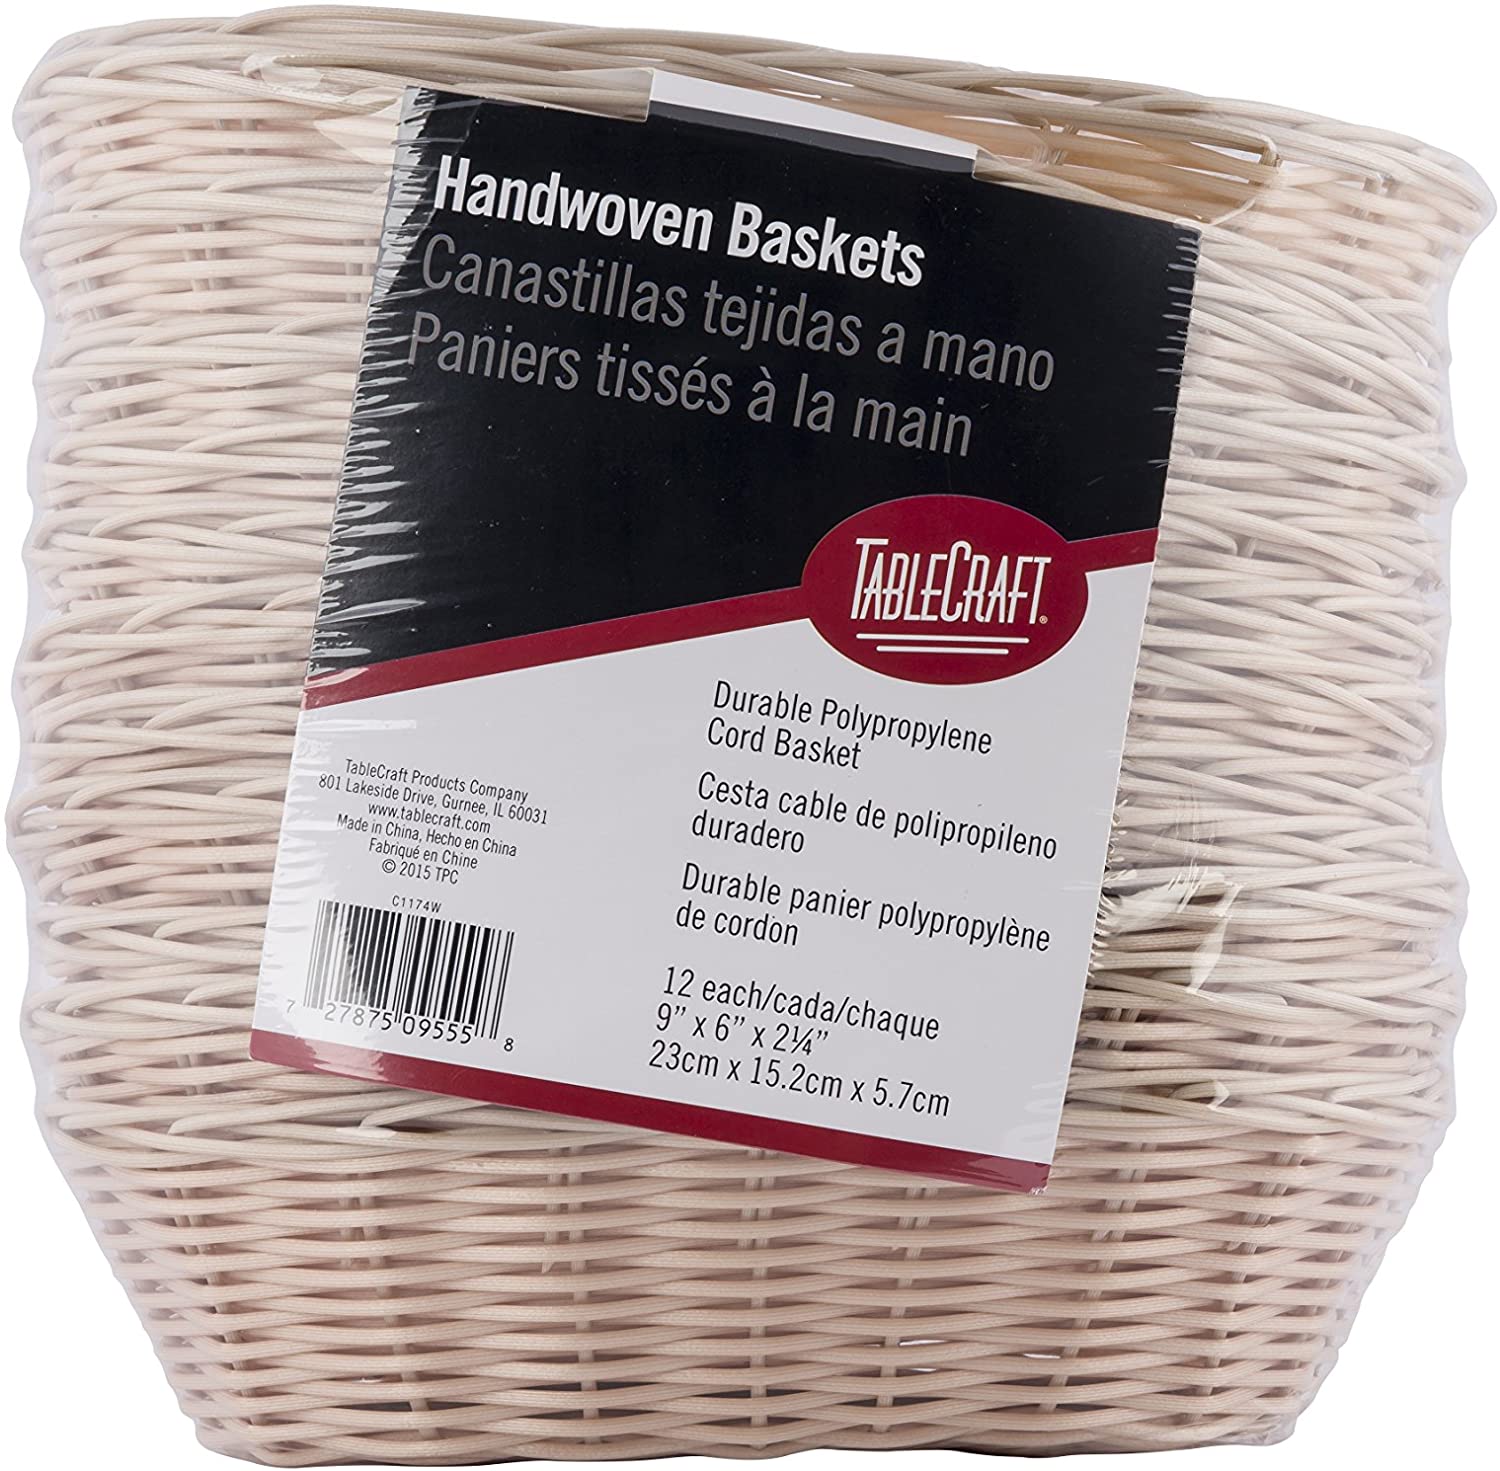 9 x 6 x 2.25 Details about   TableCraft Products C1174W Basket Pack of 12 Natural Oval 